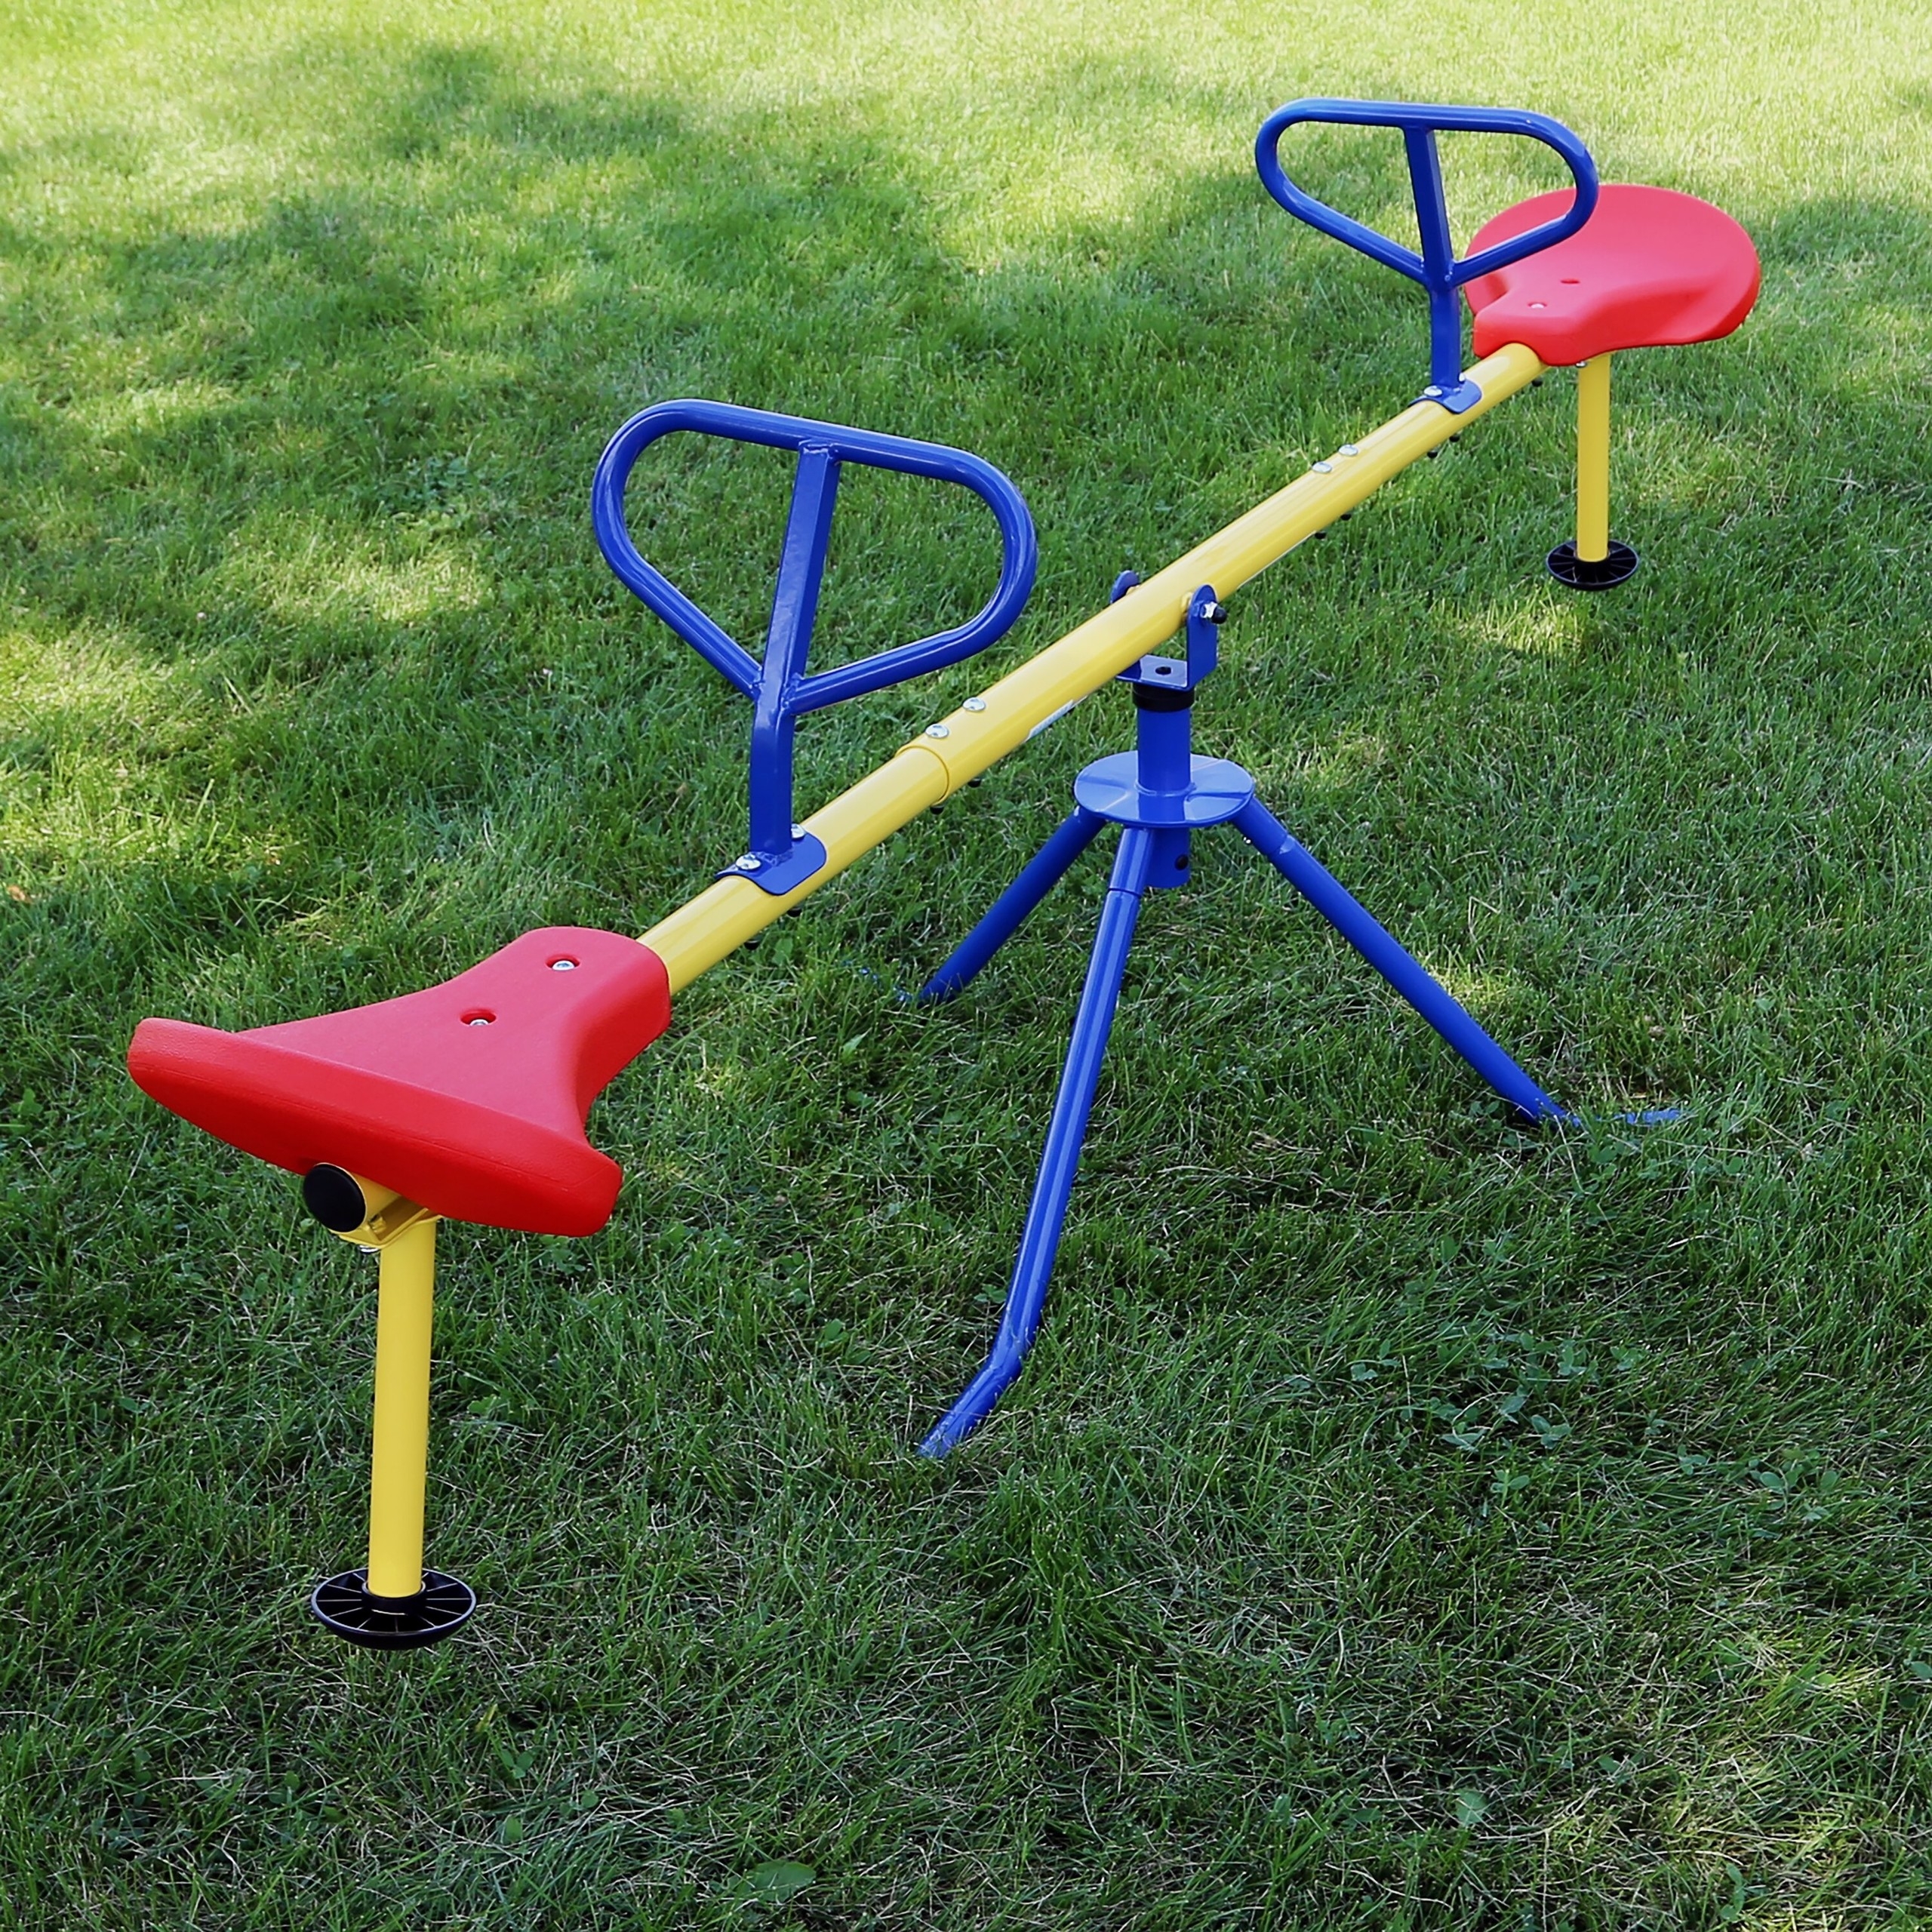 HAPPYGRILL Kids Seesaw Swivel Patio Backyard Teeter Totter Equipment with 360 Degree Rotation 